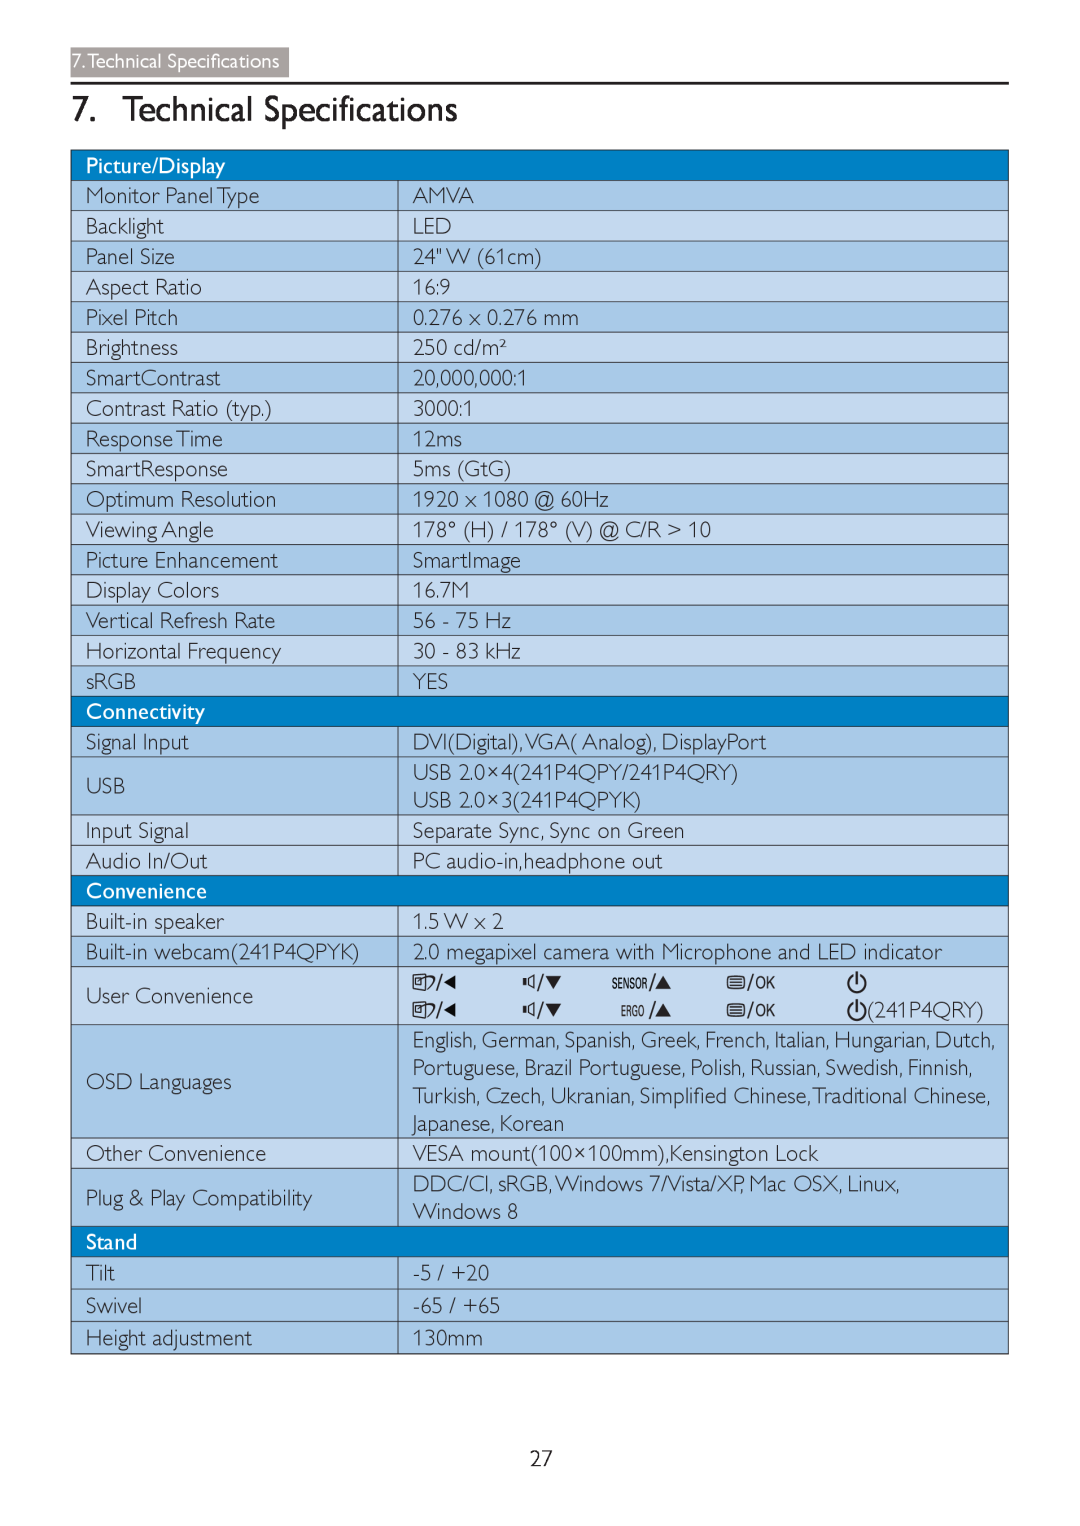 Philips 241P4QPYK, 241P4QRY user manual Technical Specifications, Picture/Display, Connectivity, Convenience, Stand 